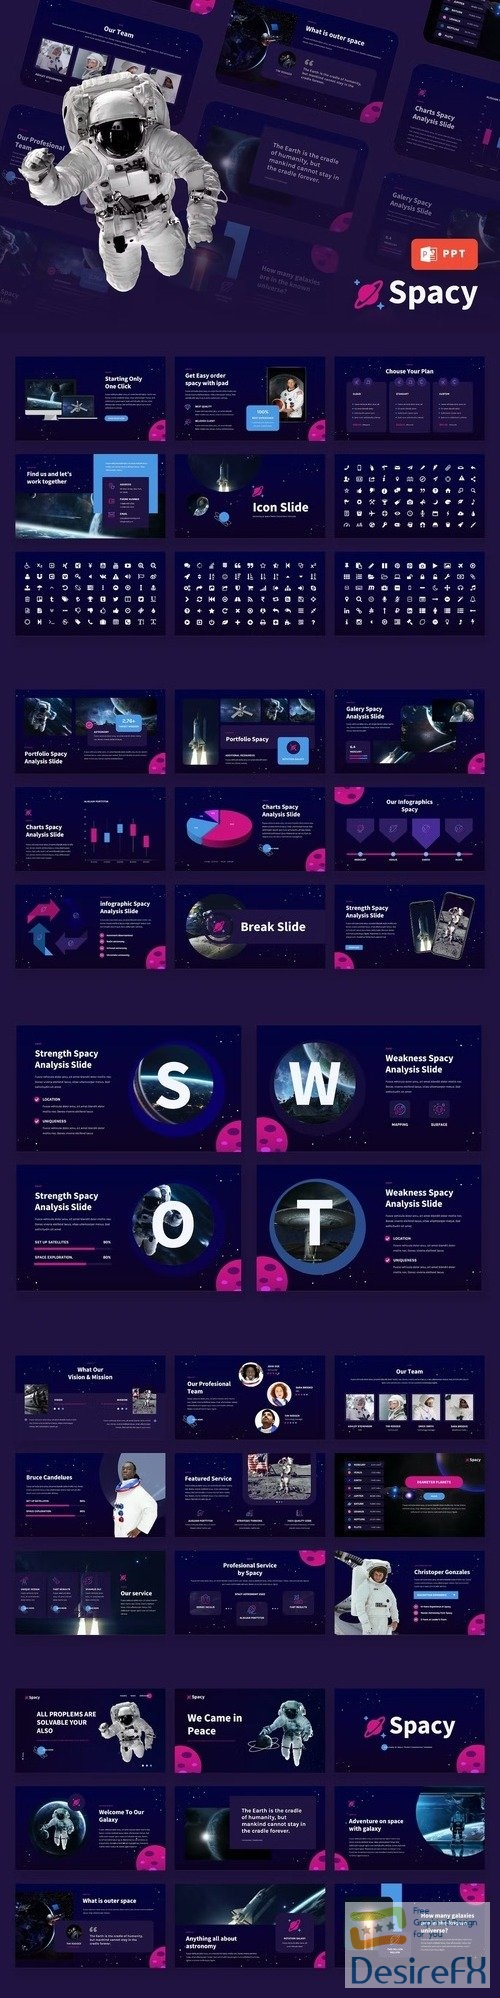 Spacy - Space Theme Powerpoint Template